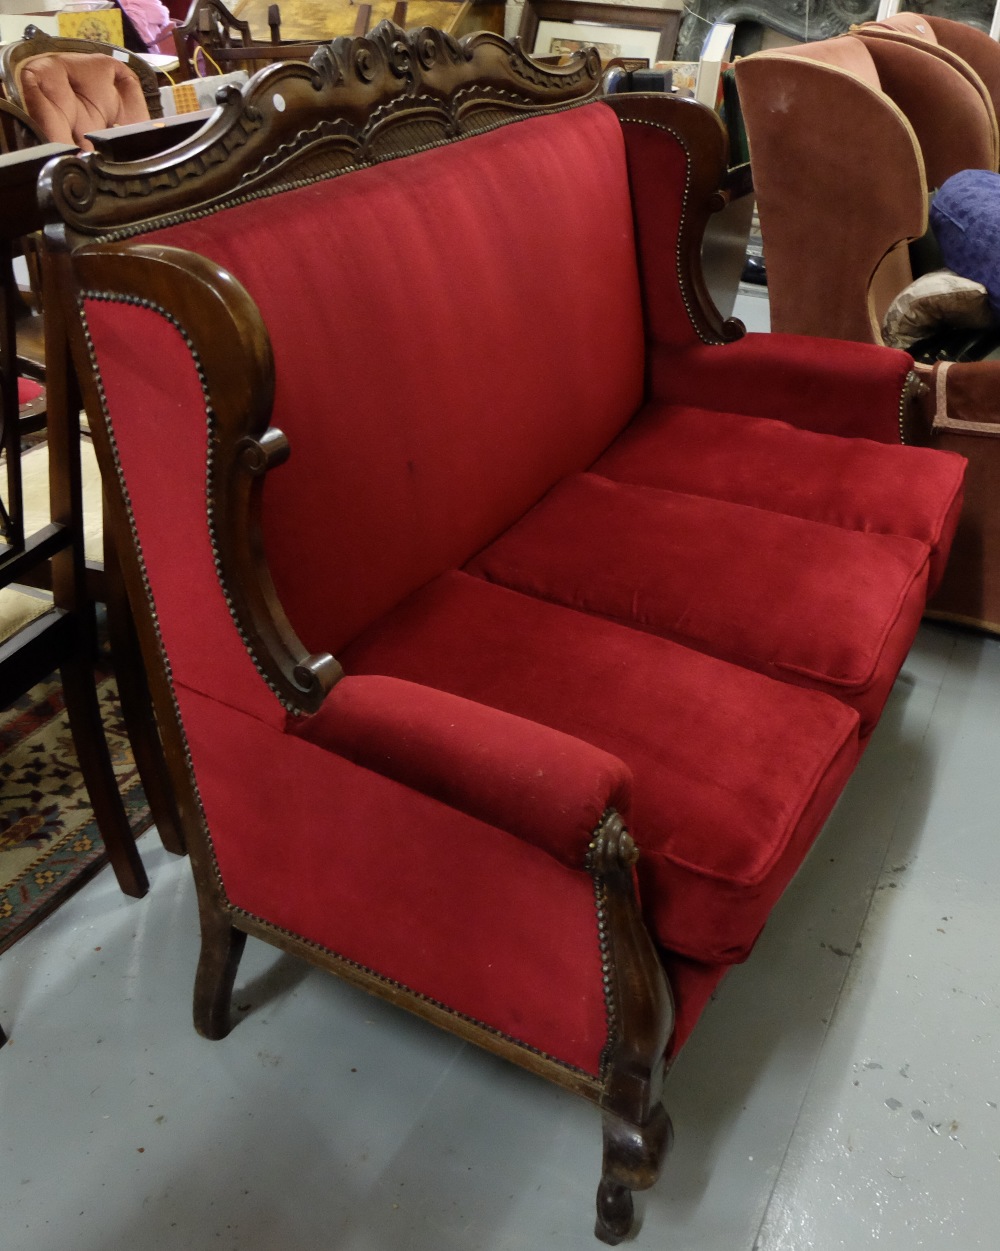 Mahogany framed 3 seater settee with carved p rail and sabre front legs, 56"w x 45"h x 28"d - Image 2 of 2